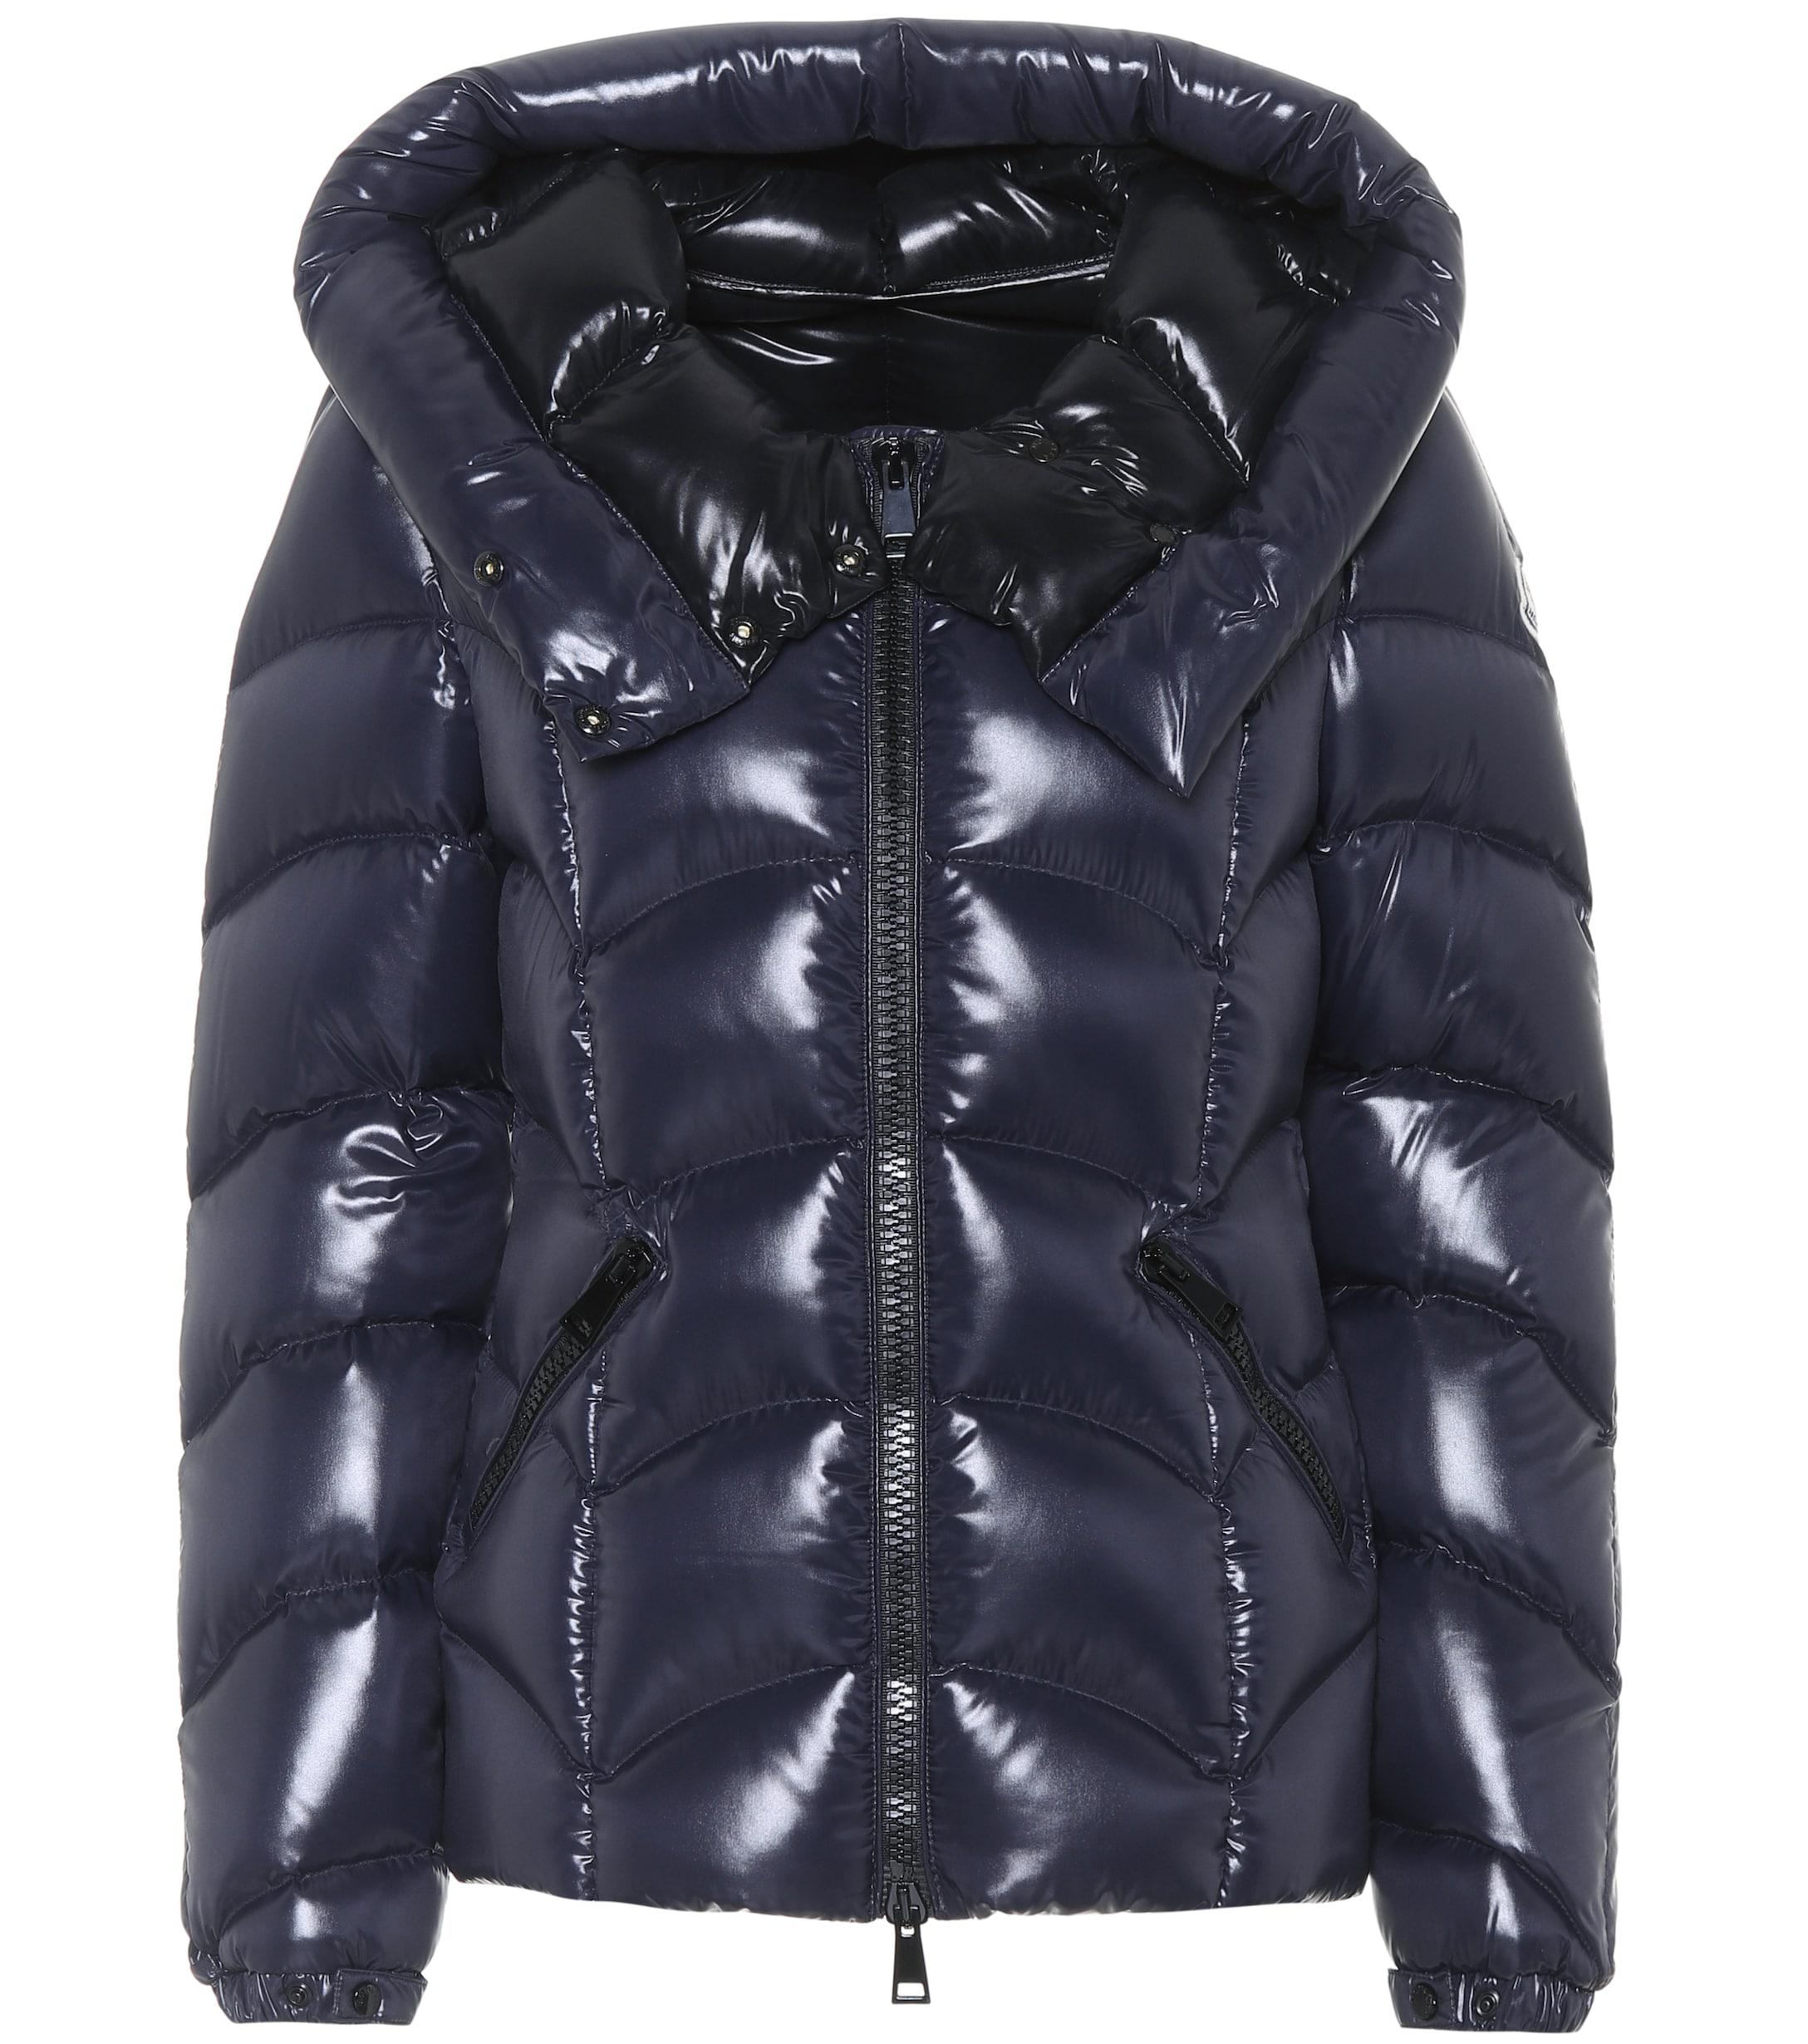 Moncler Akebia Shiny Puffer Jacket in Blue - Lyst